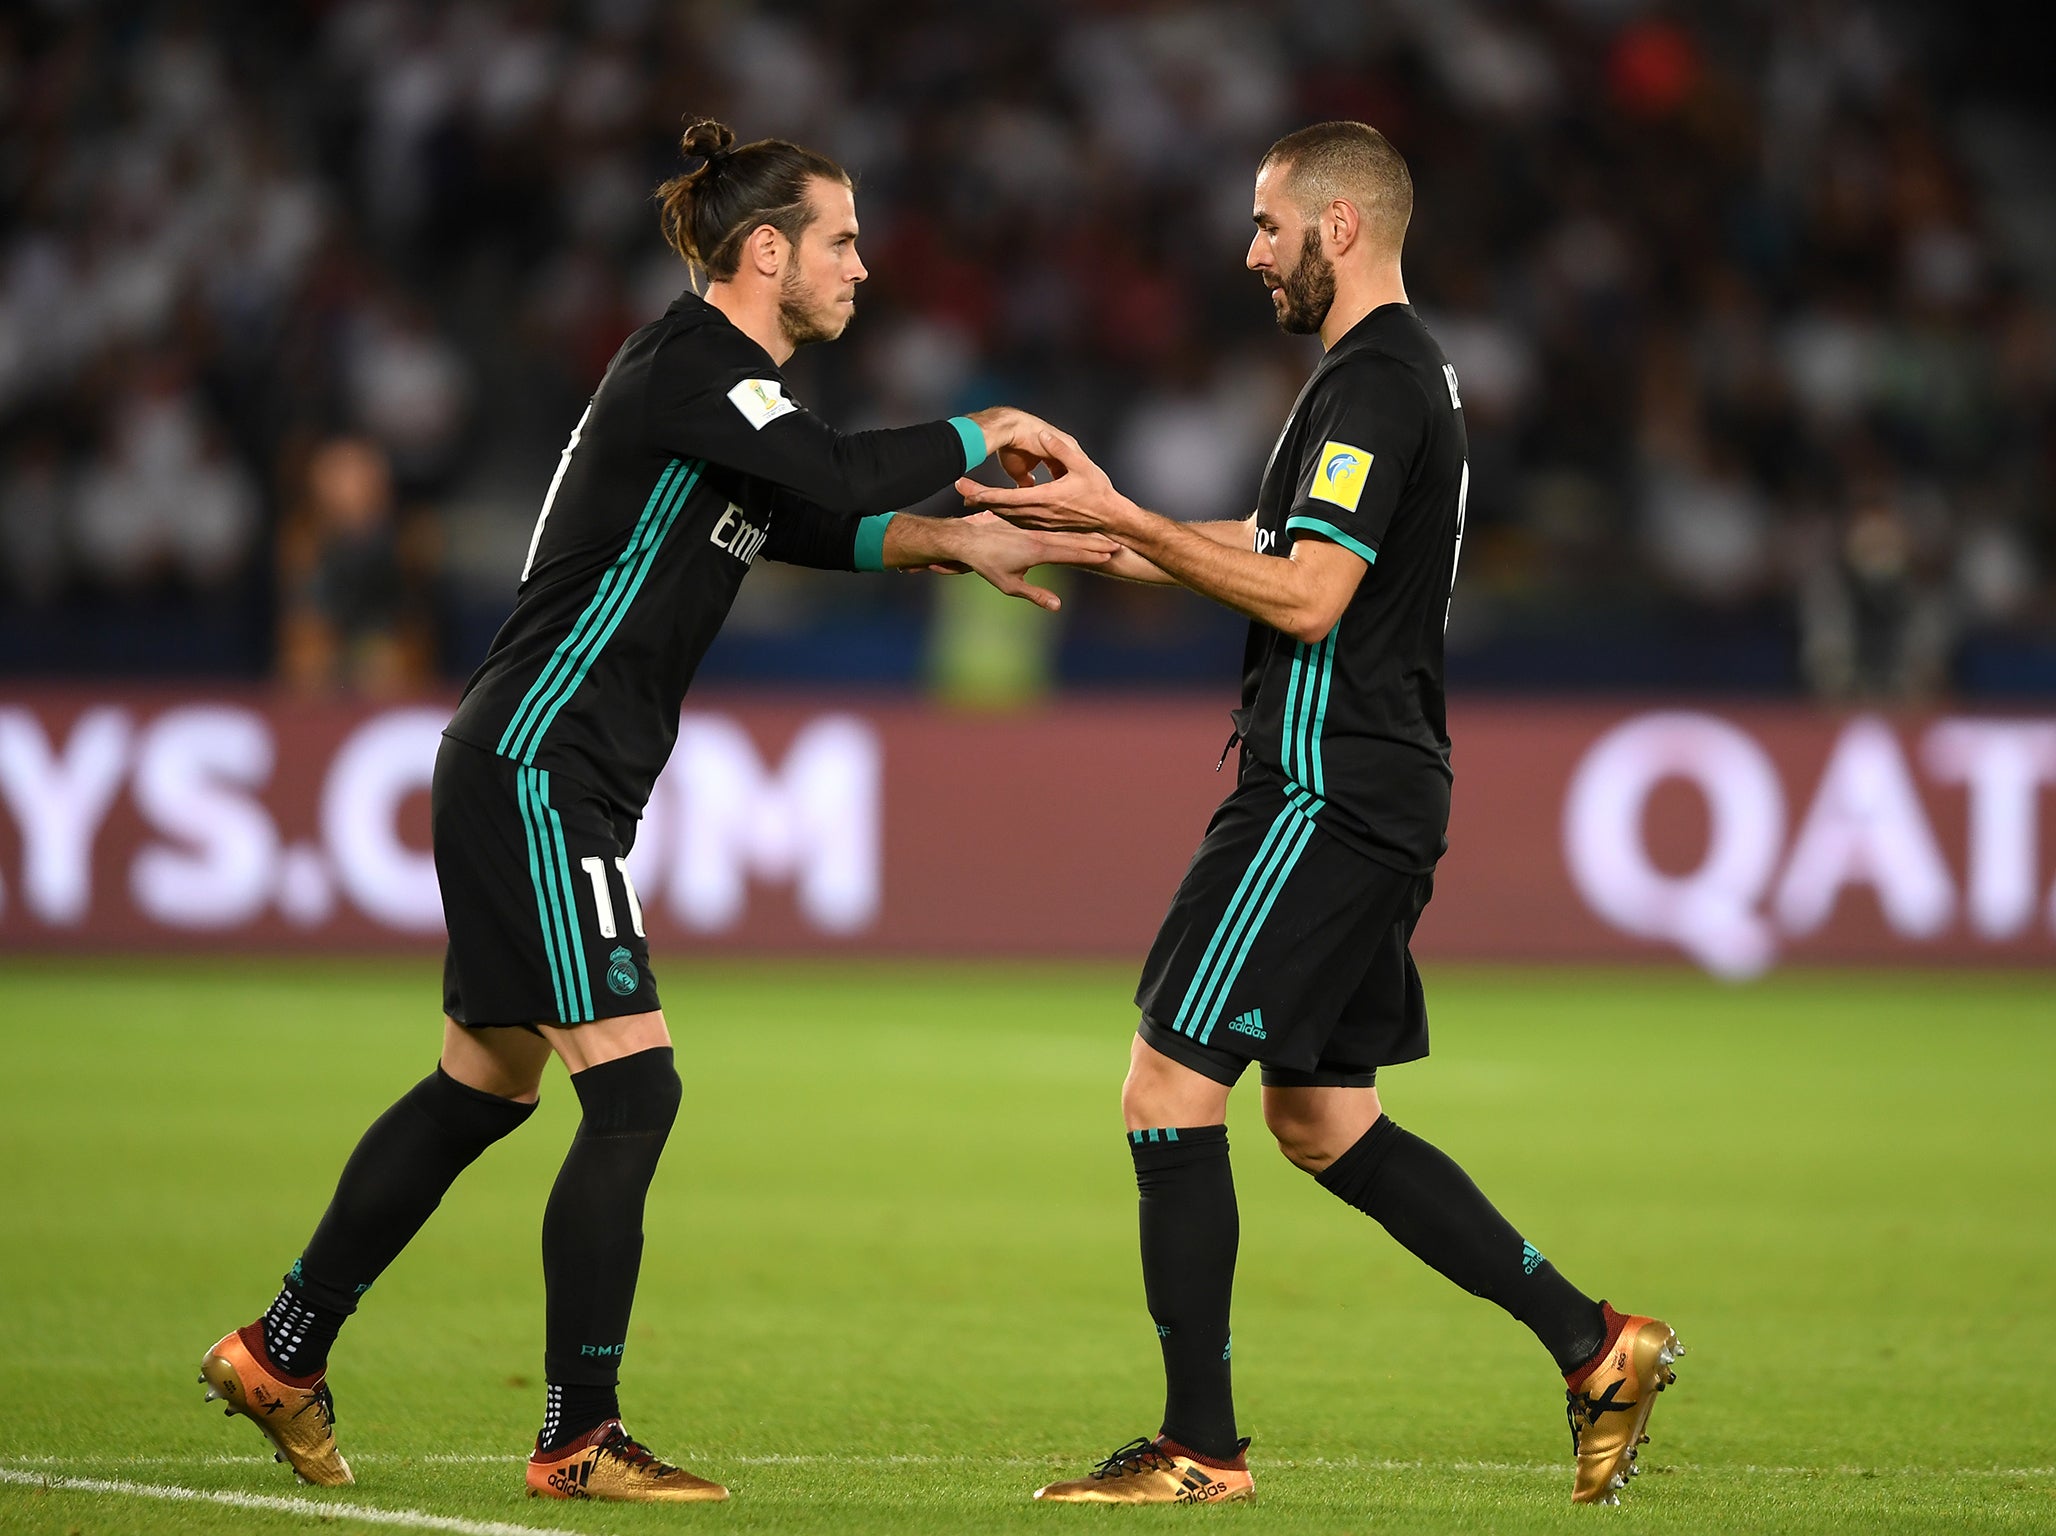 Madrid are likely to leave either Gareth Bale or Karim Benzema out